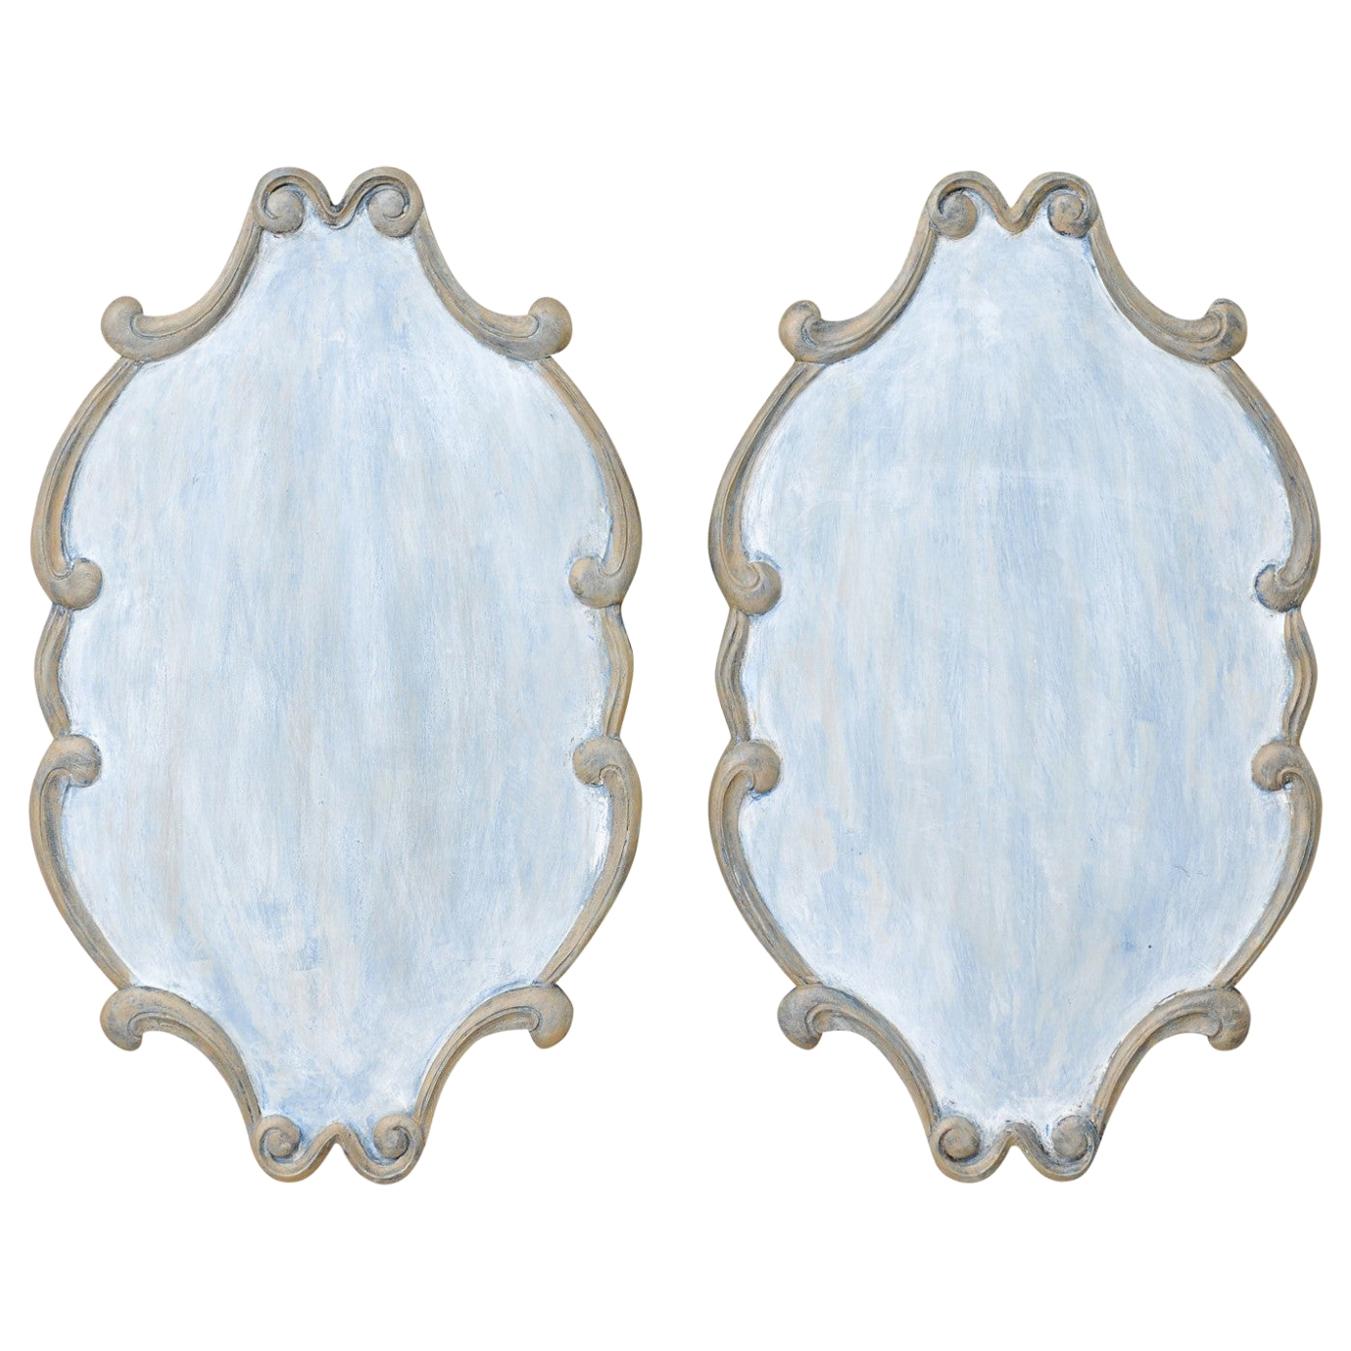 Pair of Custom Carved Wall Plaques in Blue & Pewter with Scrolling Trim Boarder For Sale